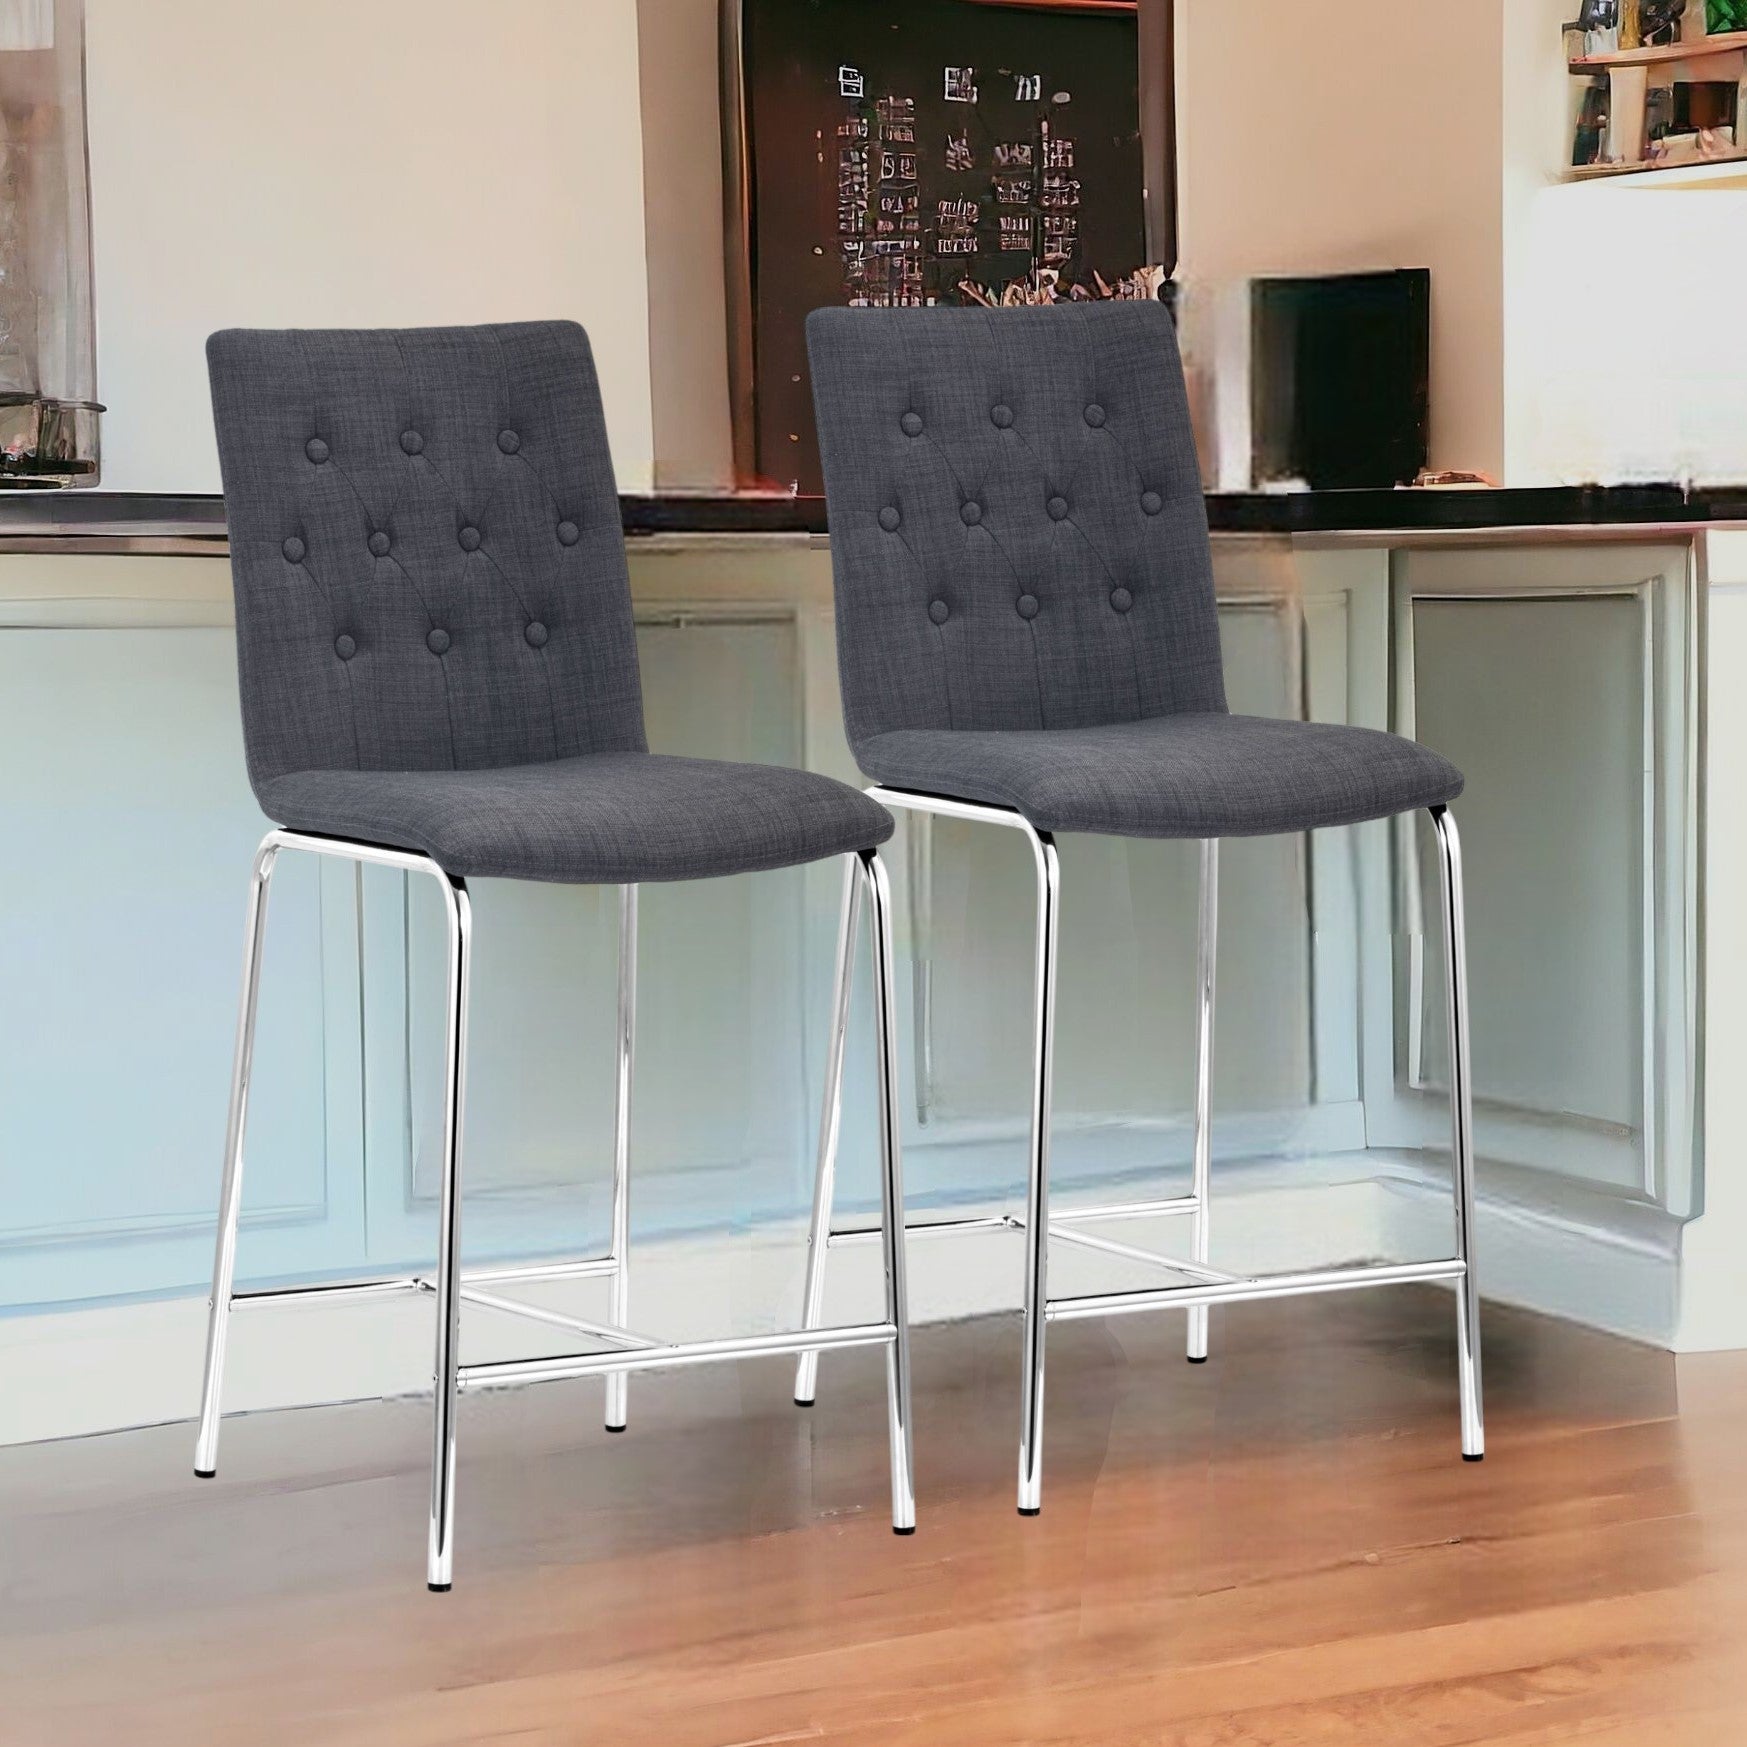 Set of Two 24" Graphite And Silver Steel Low Back Counter Height Bar Chairs